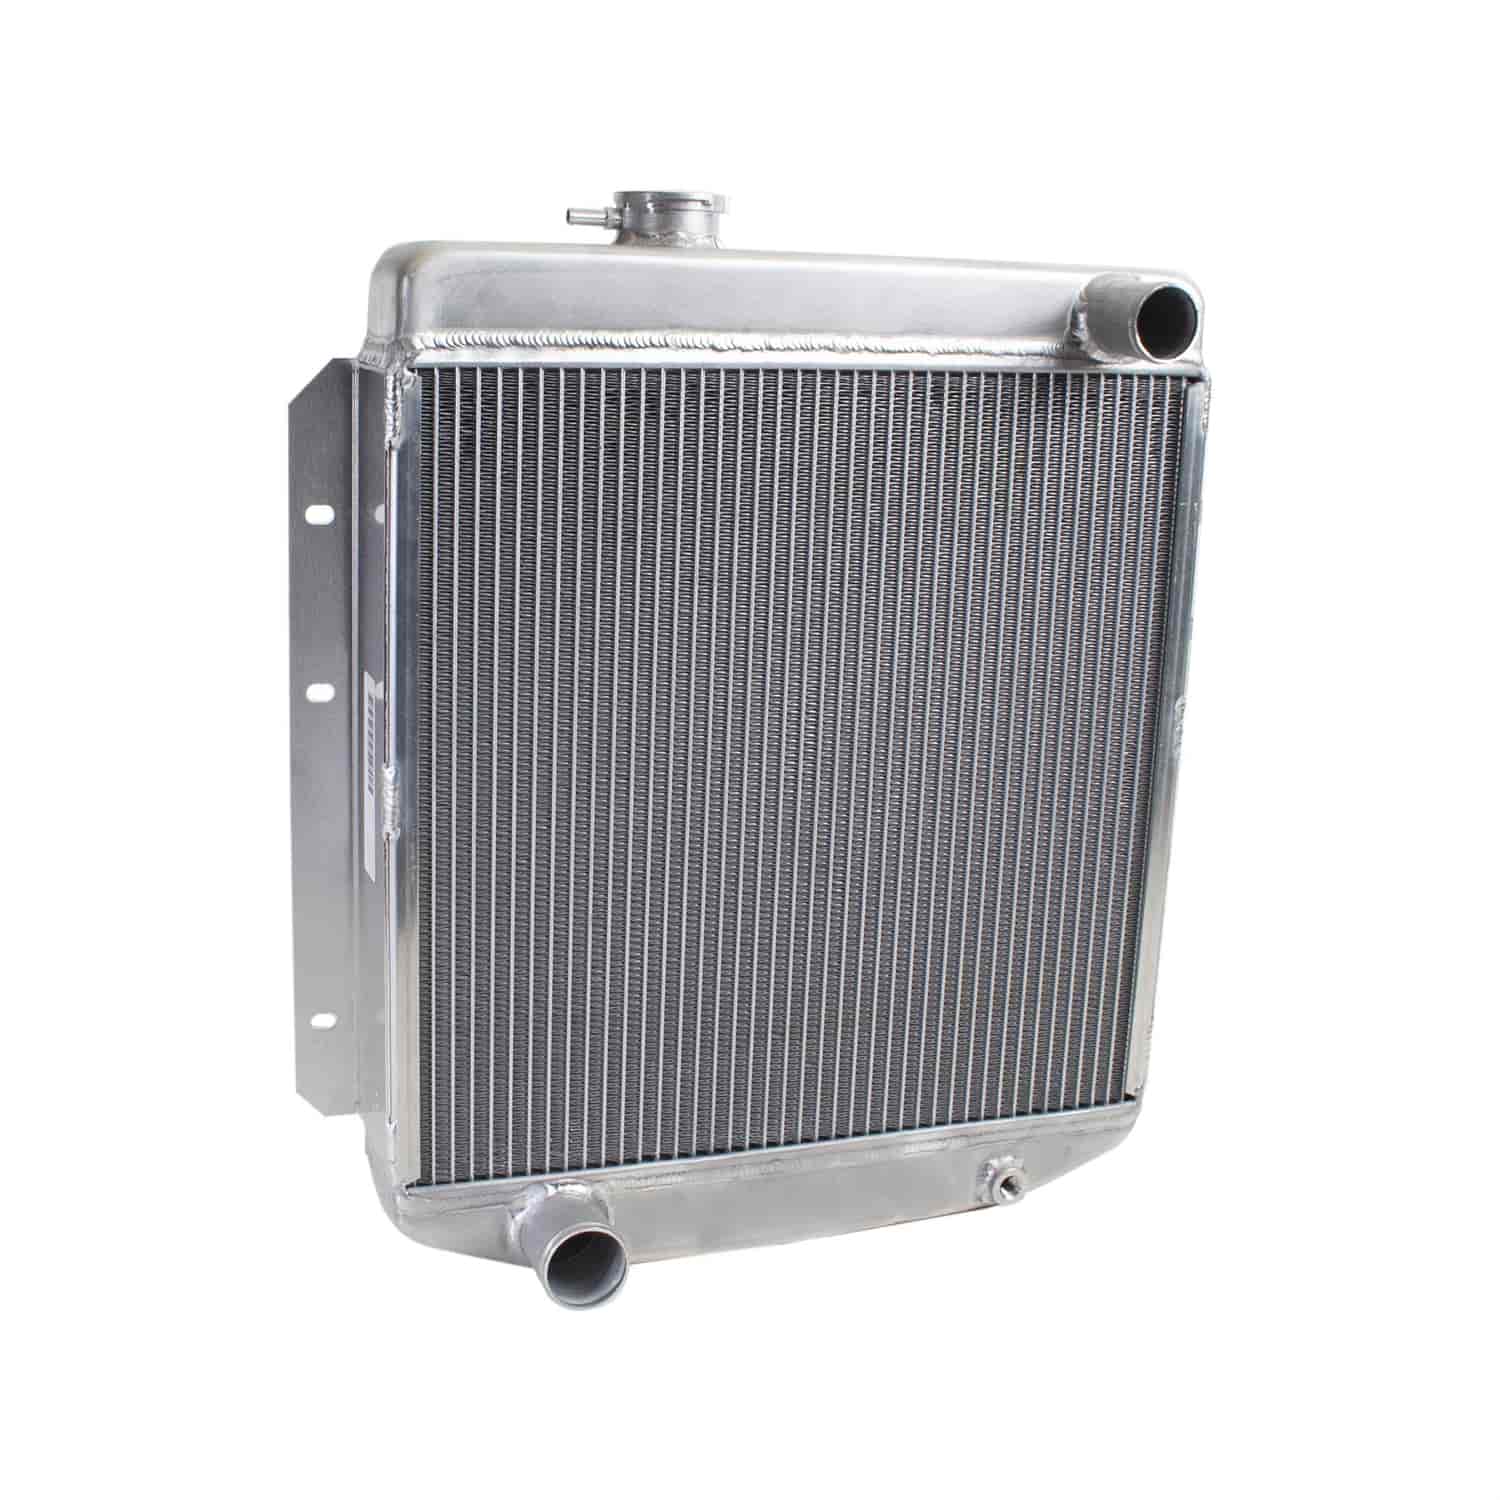 ExactFit Radiator for 1963-1965 Falcon/Comet & 1965-1966 Ford